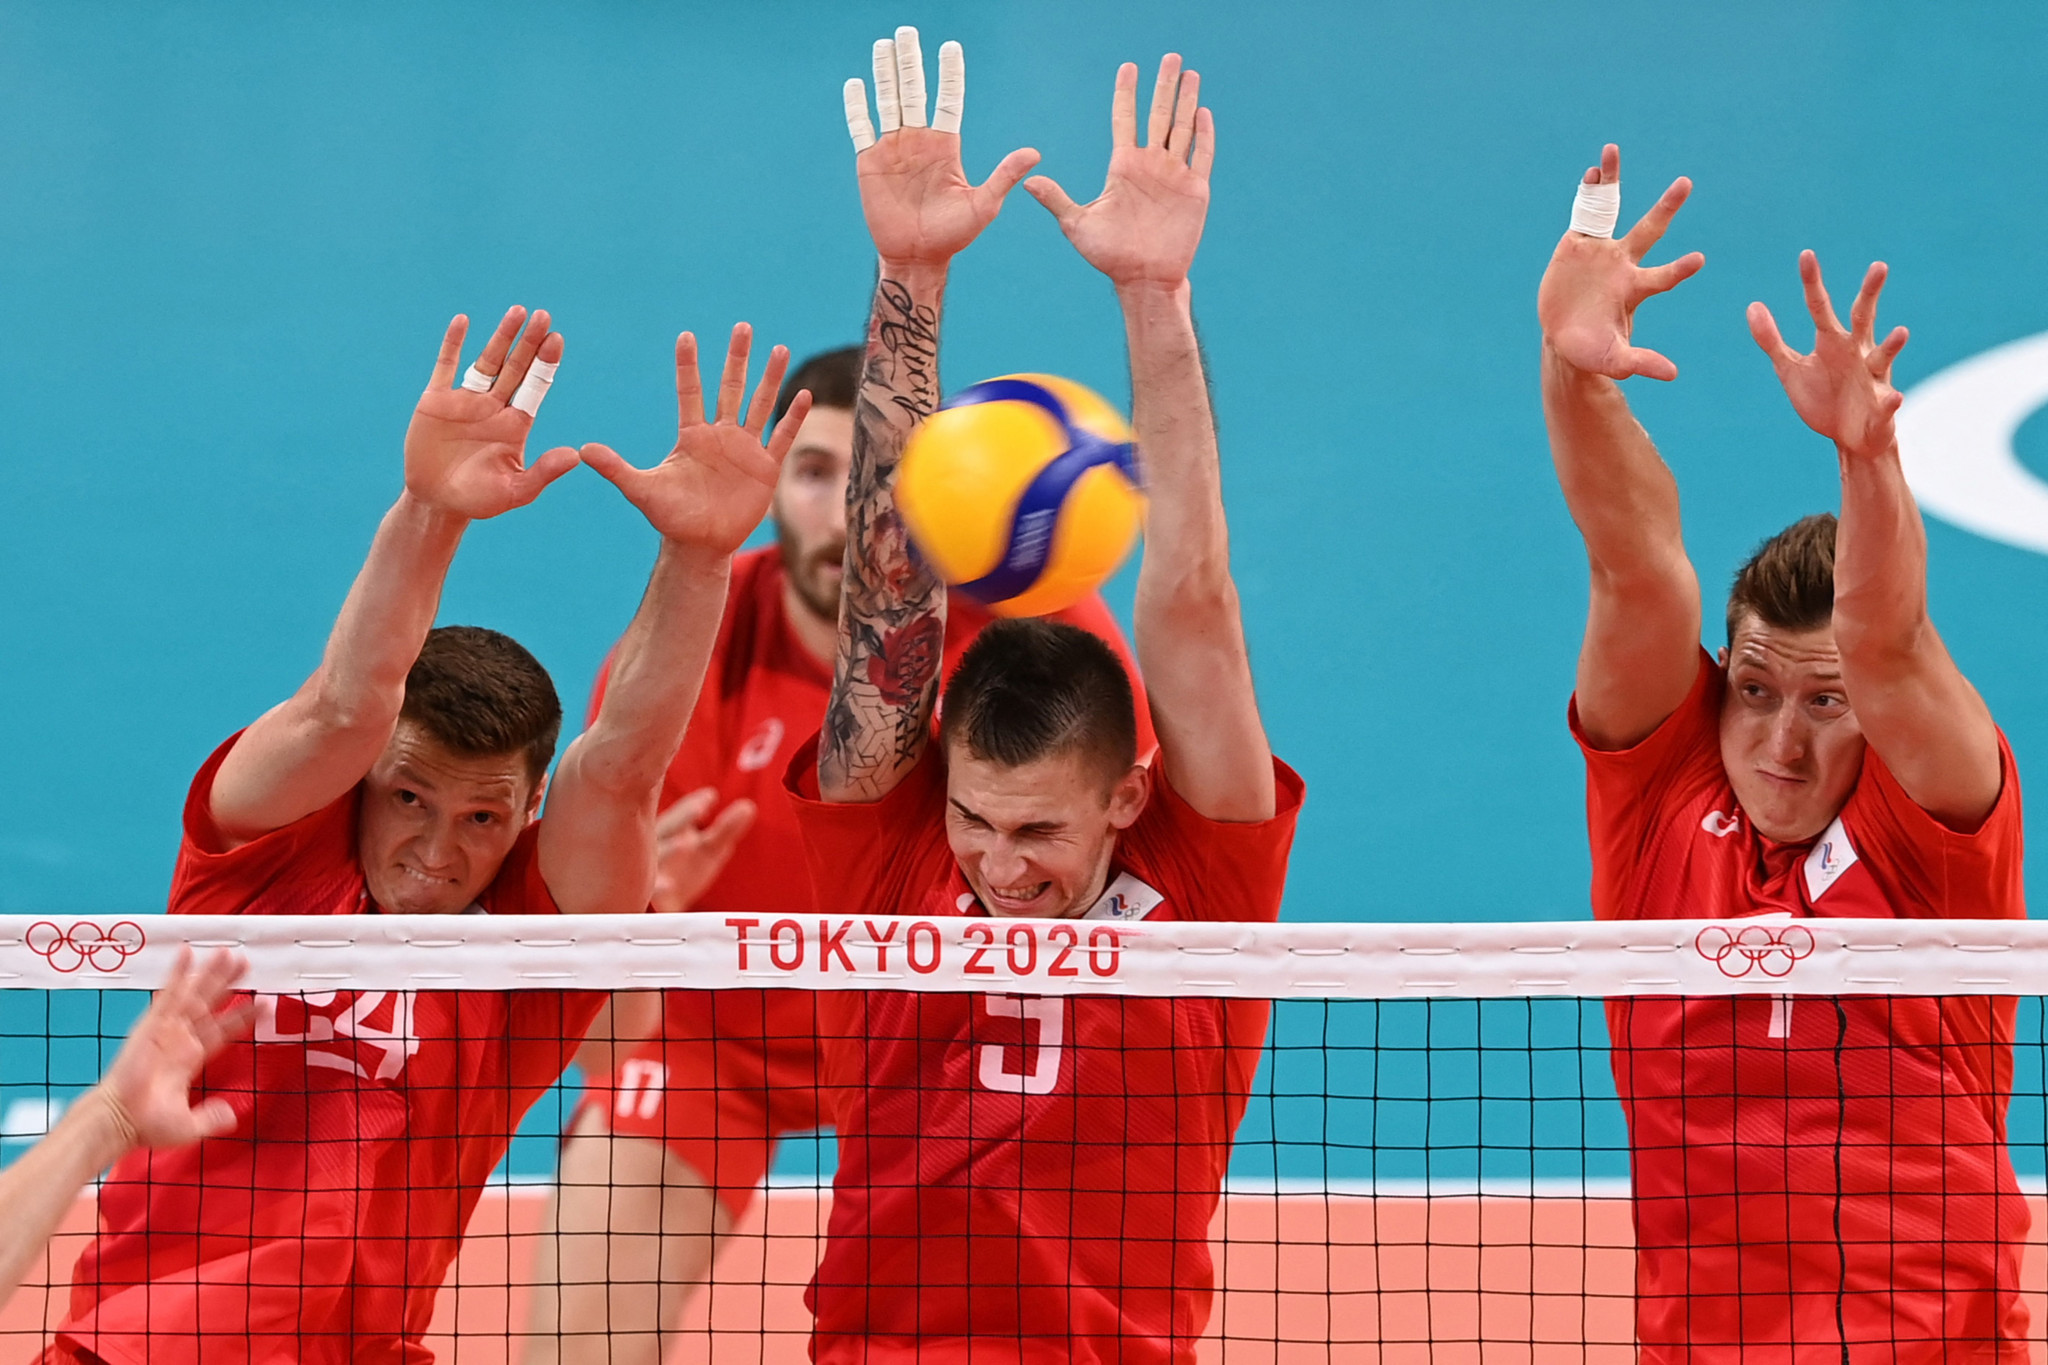 Russia had been due to stage the FIVB Men's World Championship before it was moved to Poland and Slovenia ©Getty Images